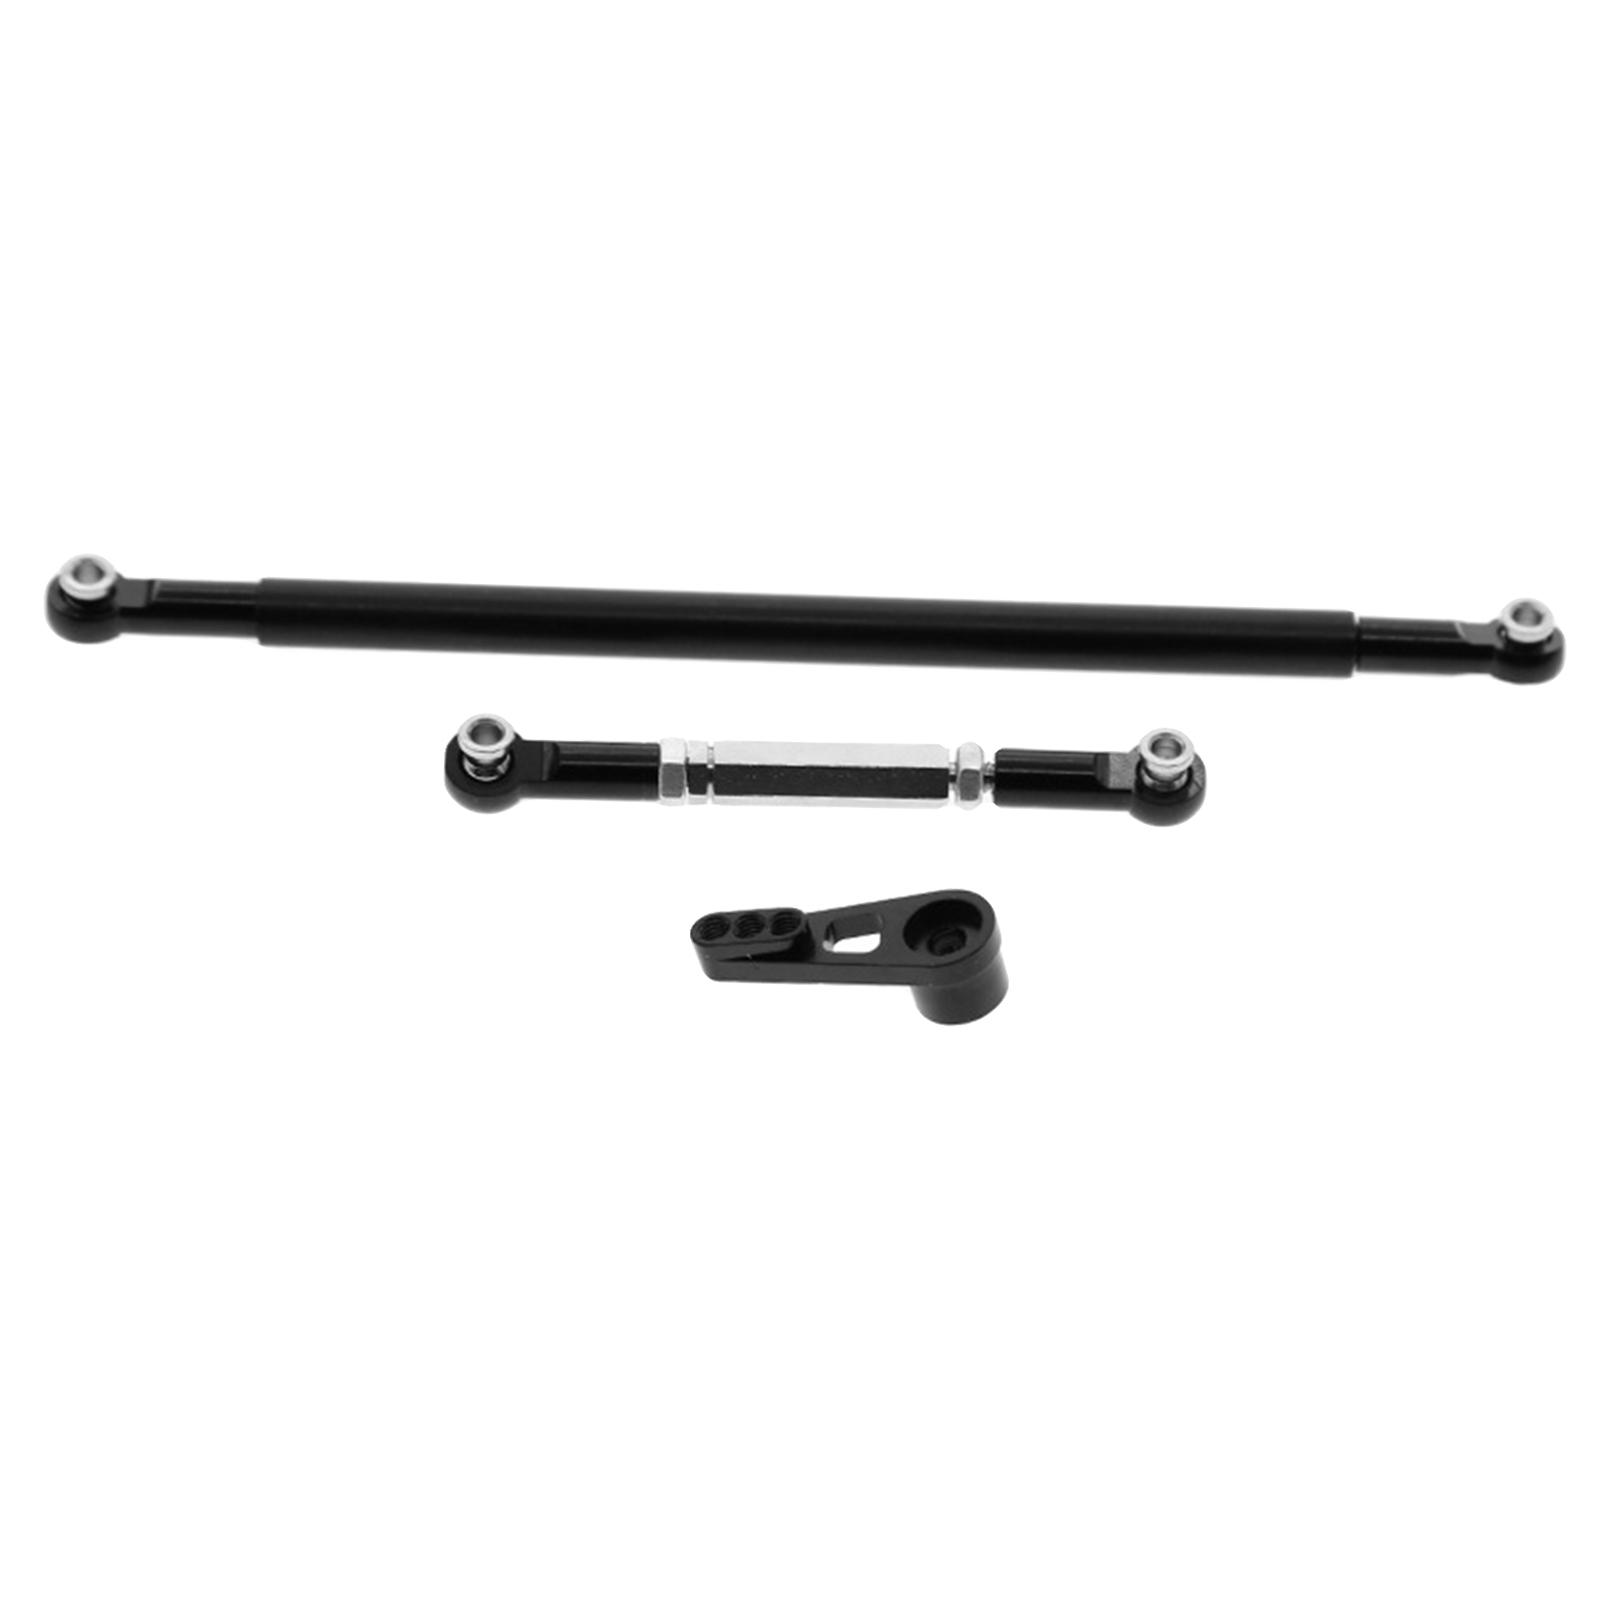 Metal Tie-Rod Steering Arm Servo Linkages For MN86S MN86 1:12 RC Car black